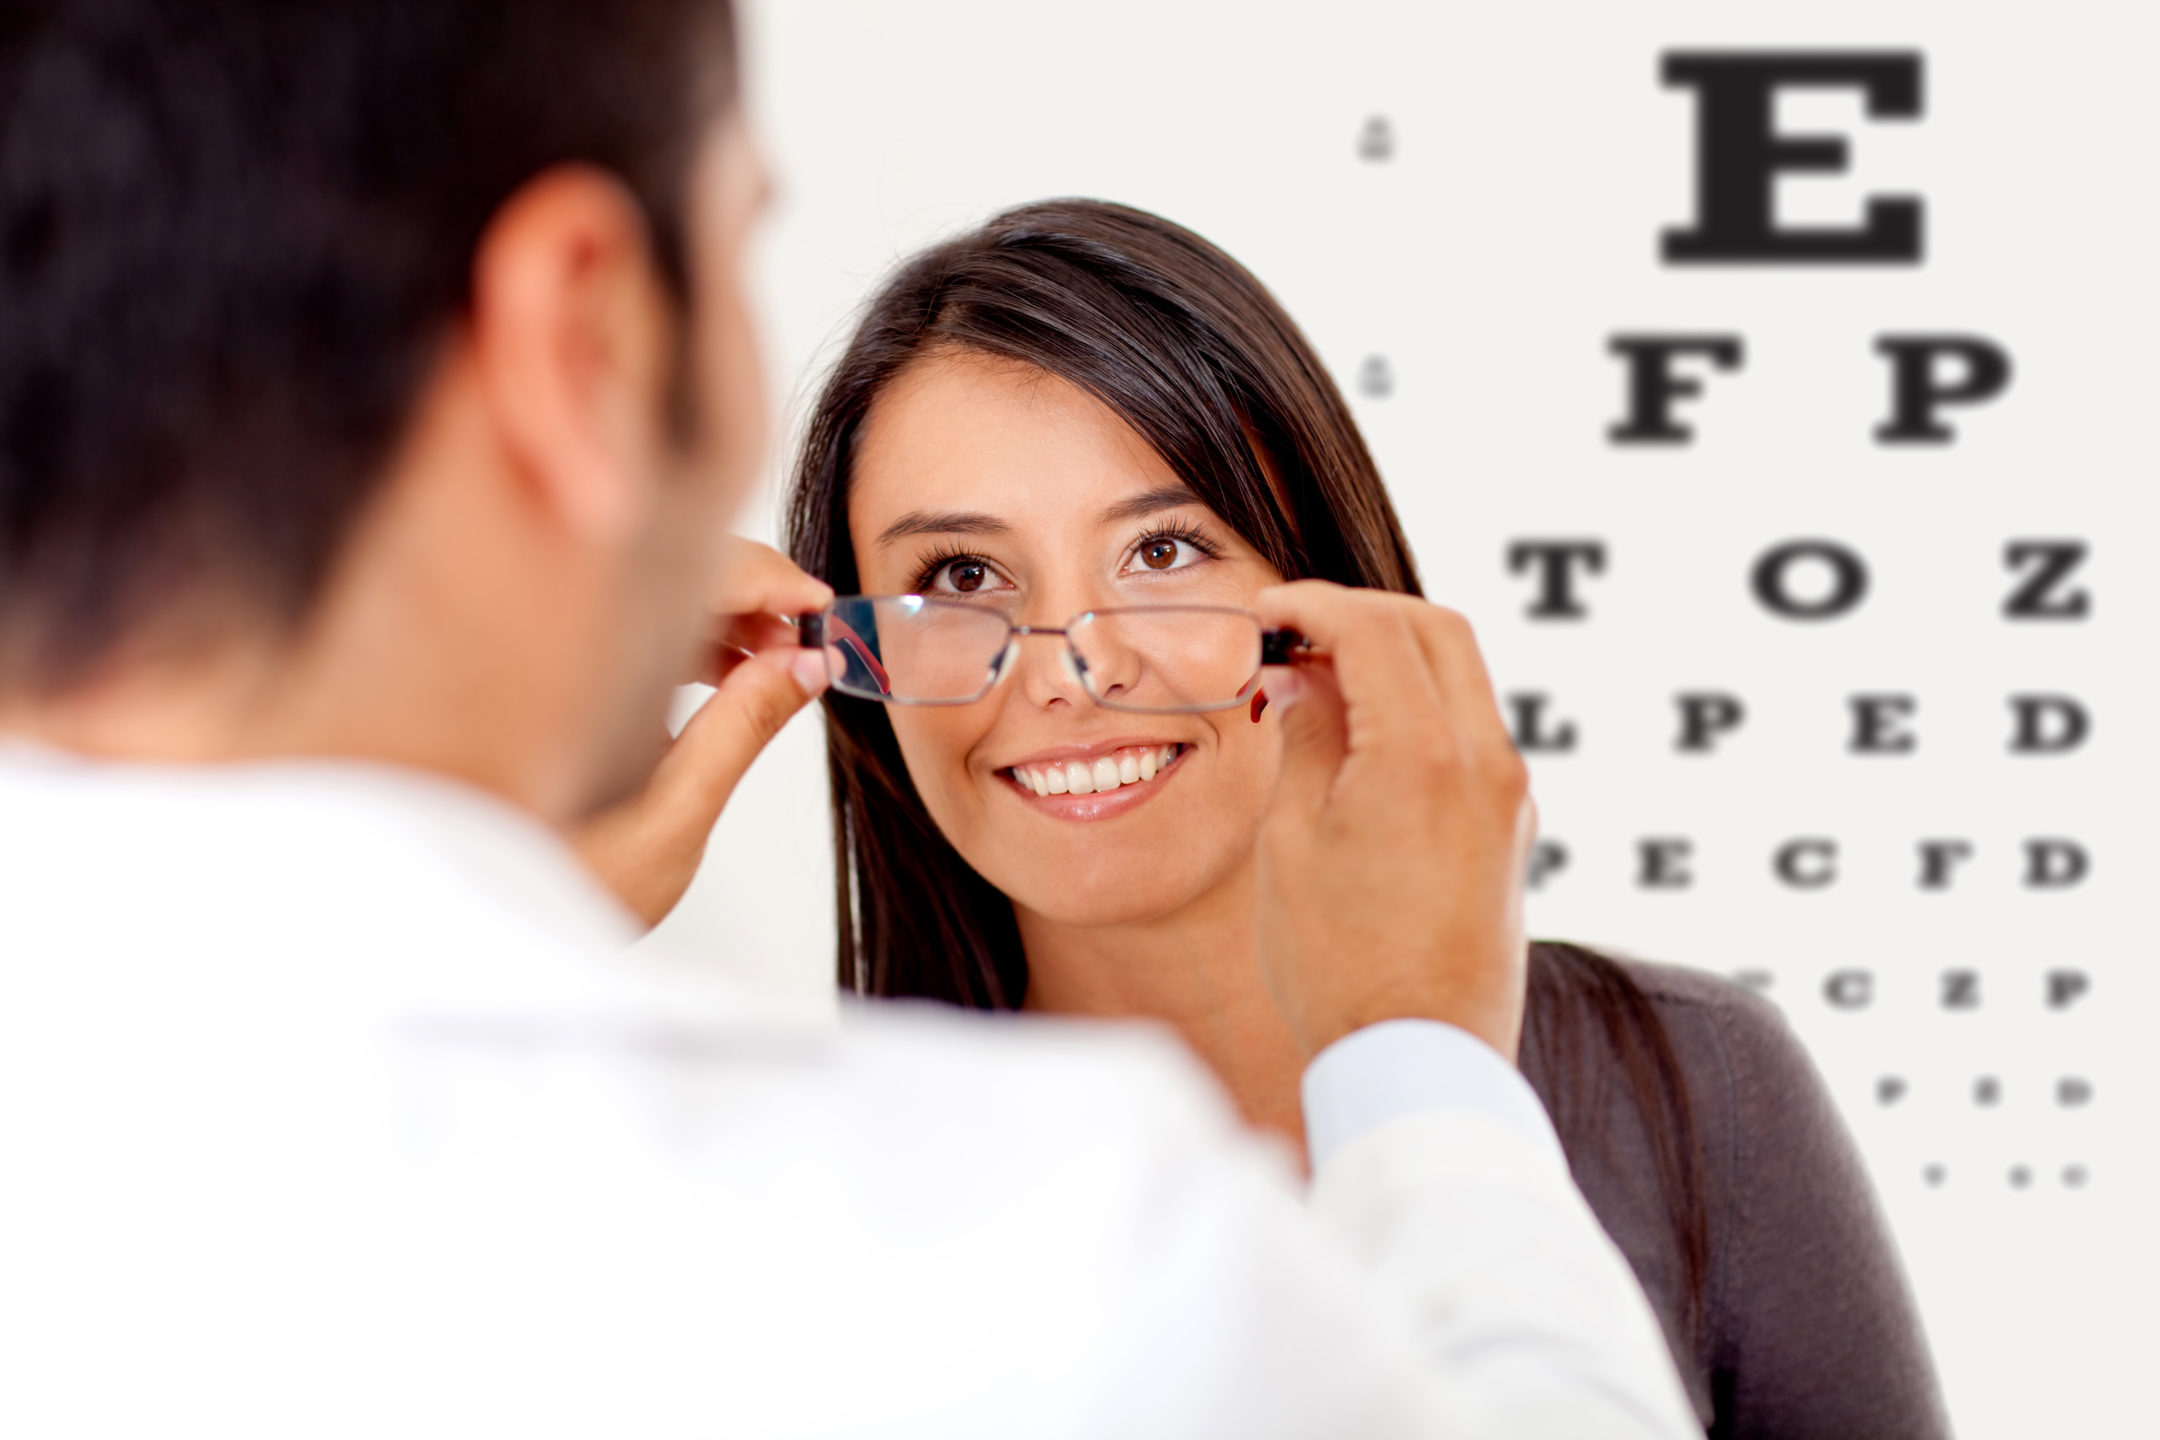 A male eye doctor helps a young woman standing in front of an eye exam chart choose glasses to help reduce eye strain. 